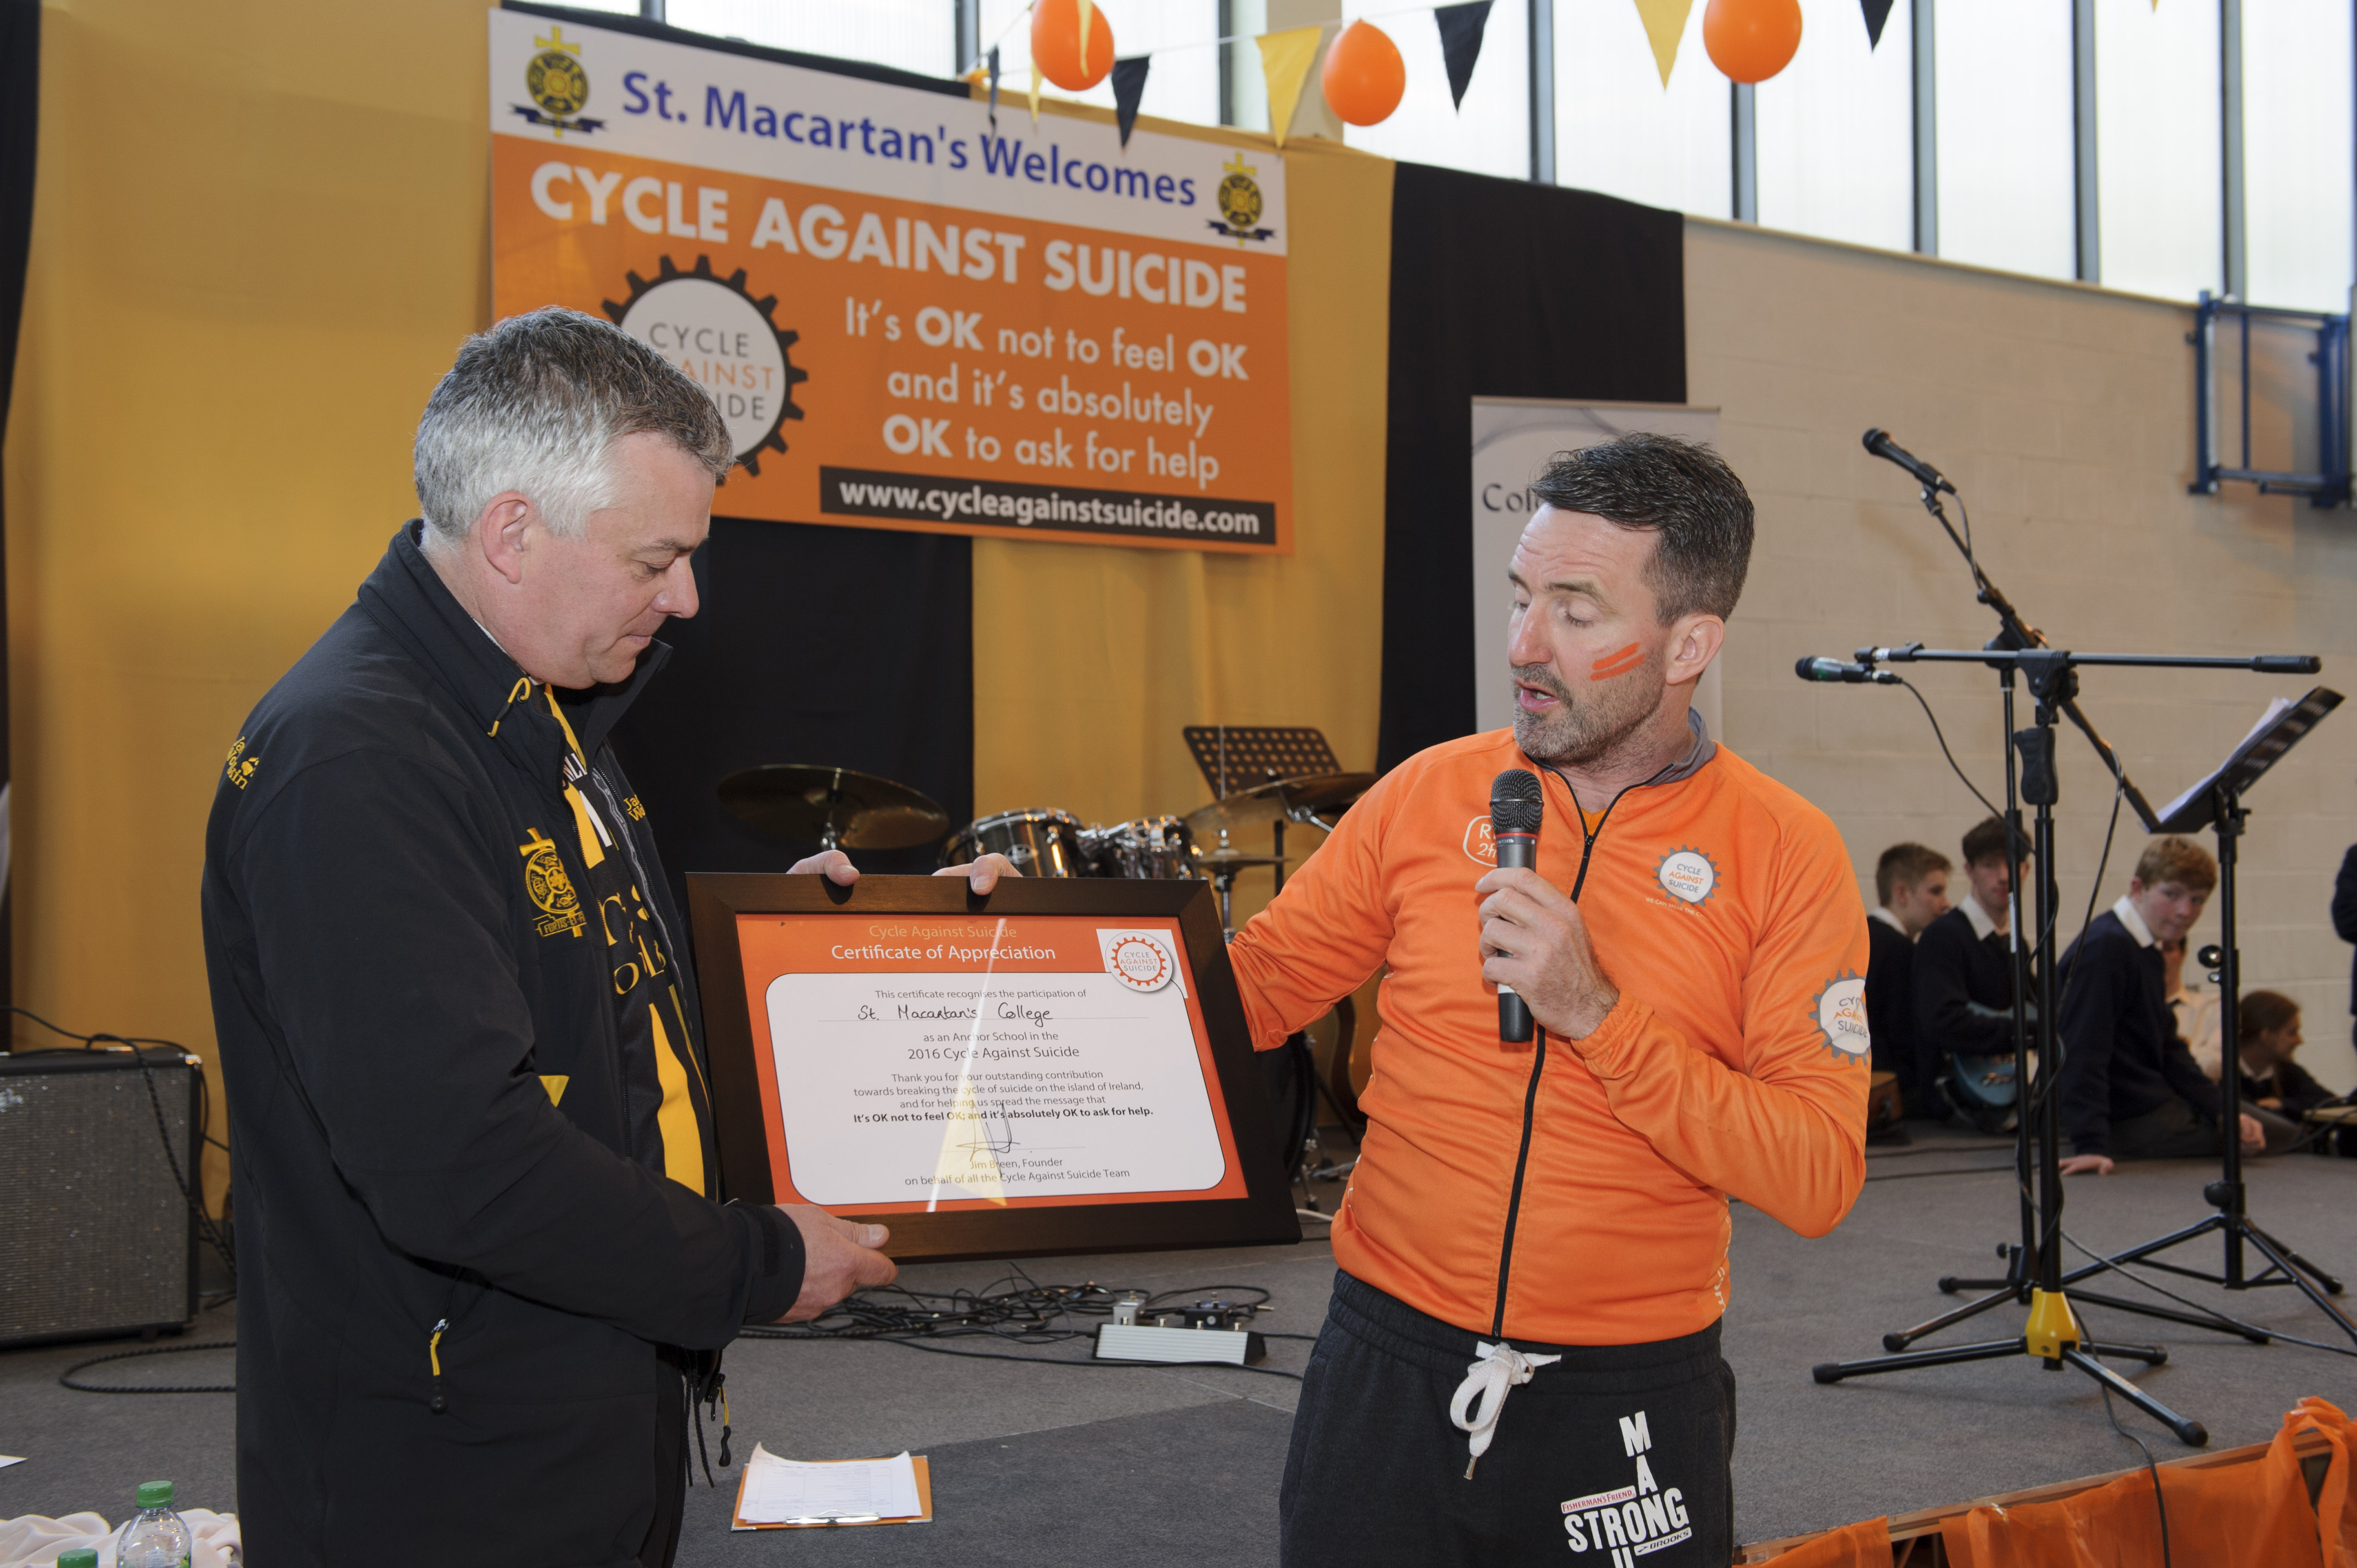 Jim Breen, right, founder of the Cycle Against Suicide, making a presentation to Raymond McHugh, Principal of St Macartan's College, in appreciation of the school hosting the event. Â©Rory Geary/The Northern Standard